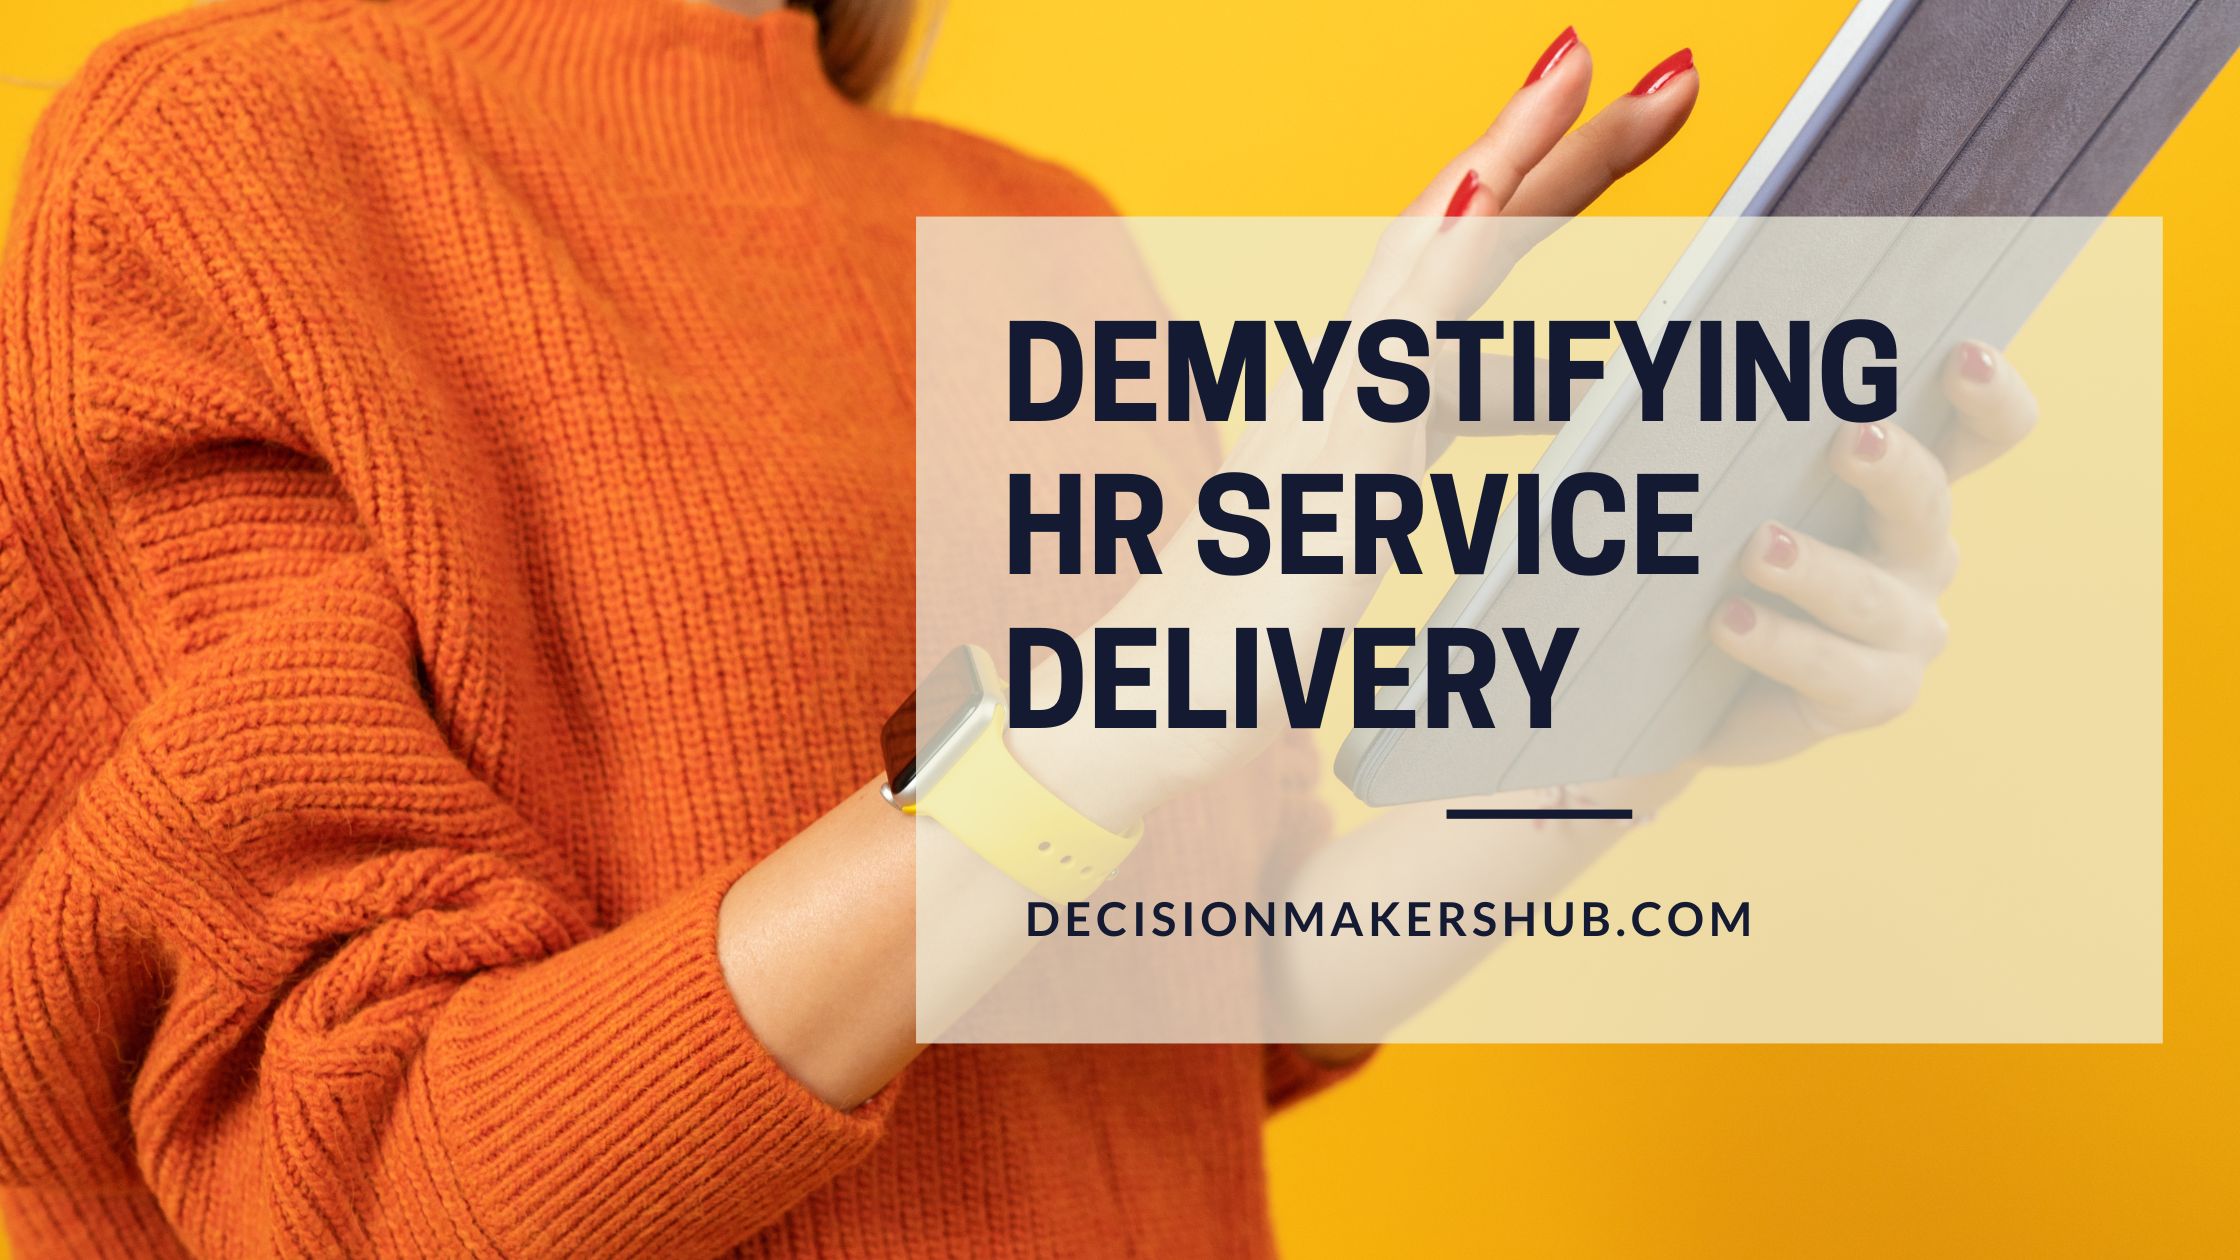 Demystifying HR Service Delivery The Cornerstone of Organizational Success